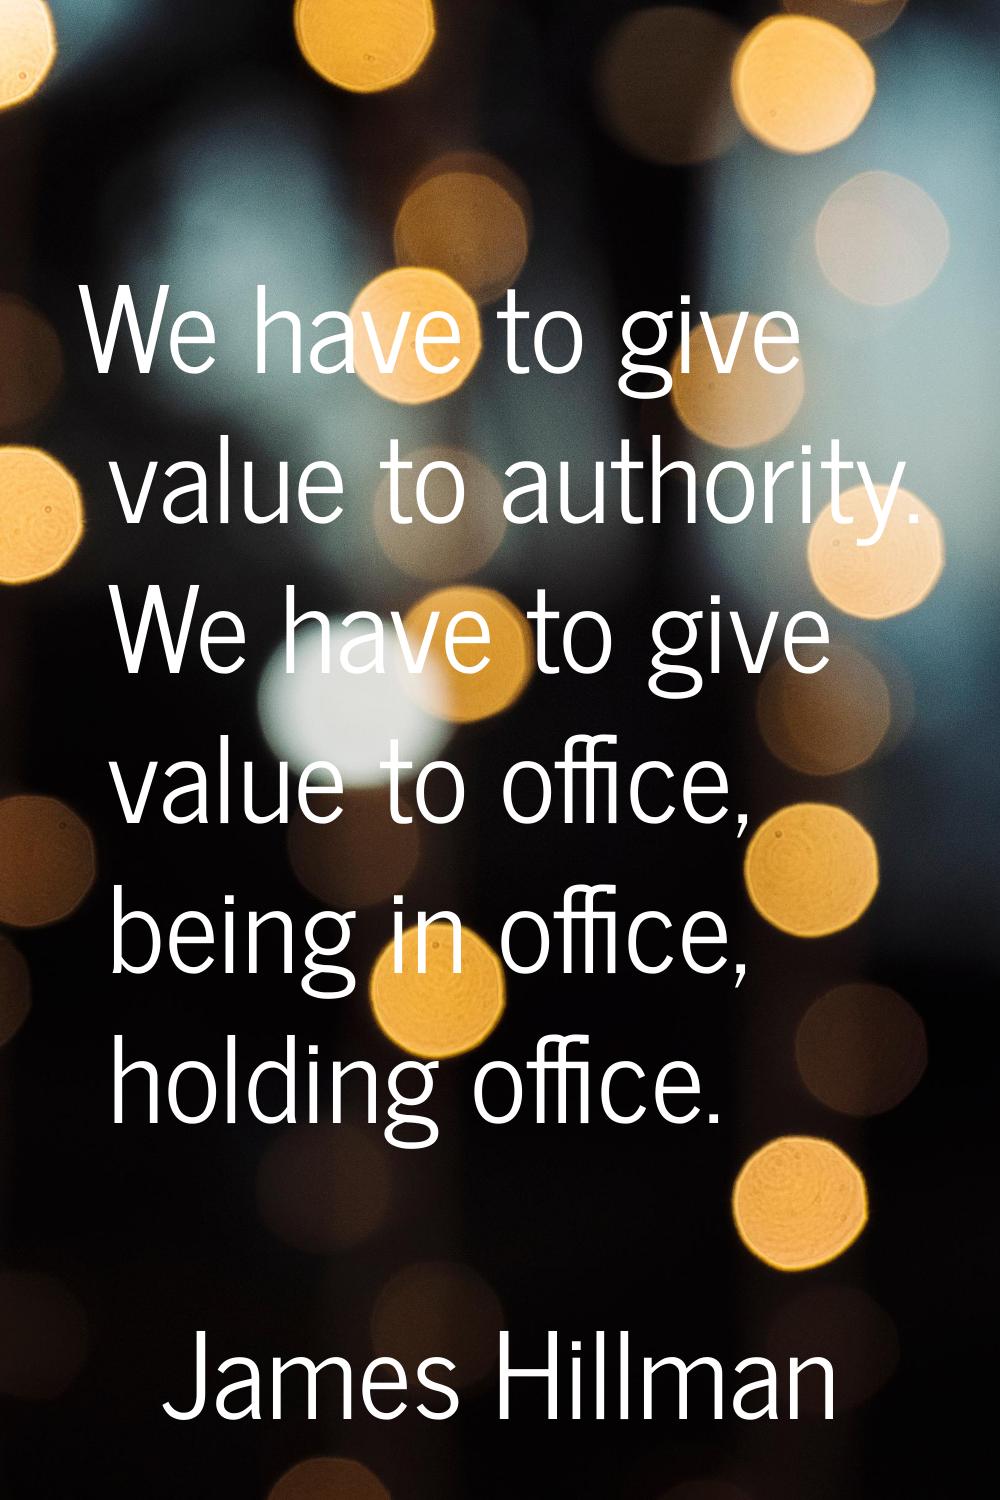 We have to give value to authority. We have to give value to office, being in office, holding offic